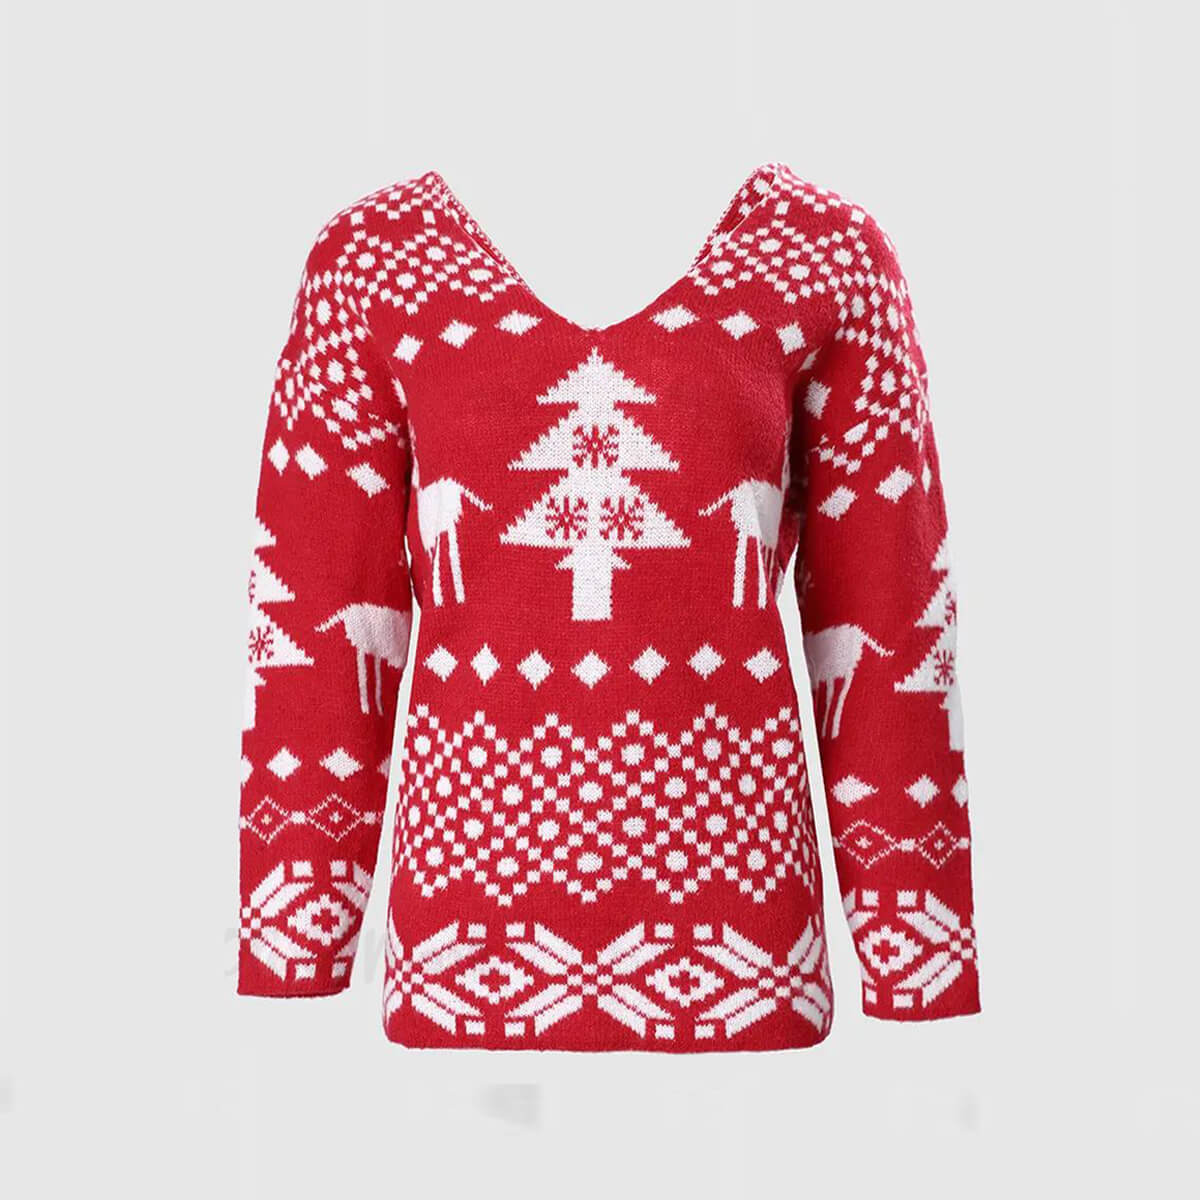 Women Christmas Sweater Criss Cross Backless Pullover Christmas Red Sweater with Long Sleeves